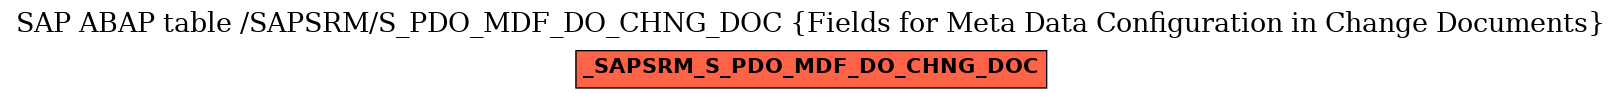 E-R Diagram for table /SAPSRM/S_PDO_MDF_DO_CHNG_DOC (Fields for Meta Data Configuration in Change Documents)